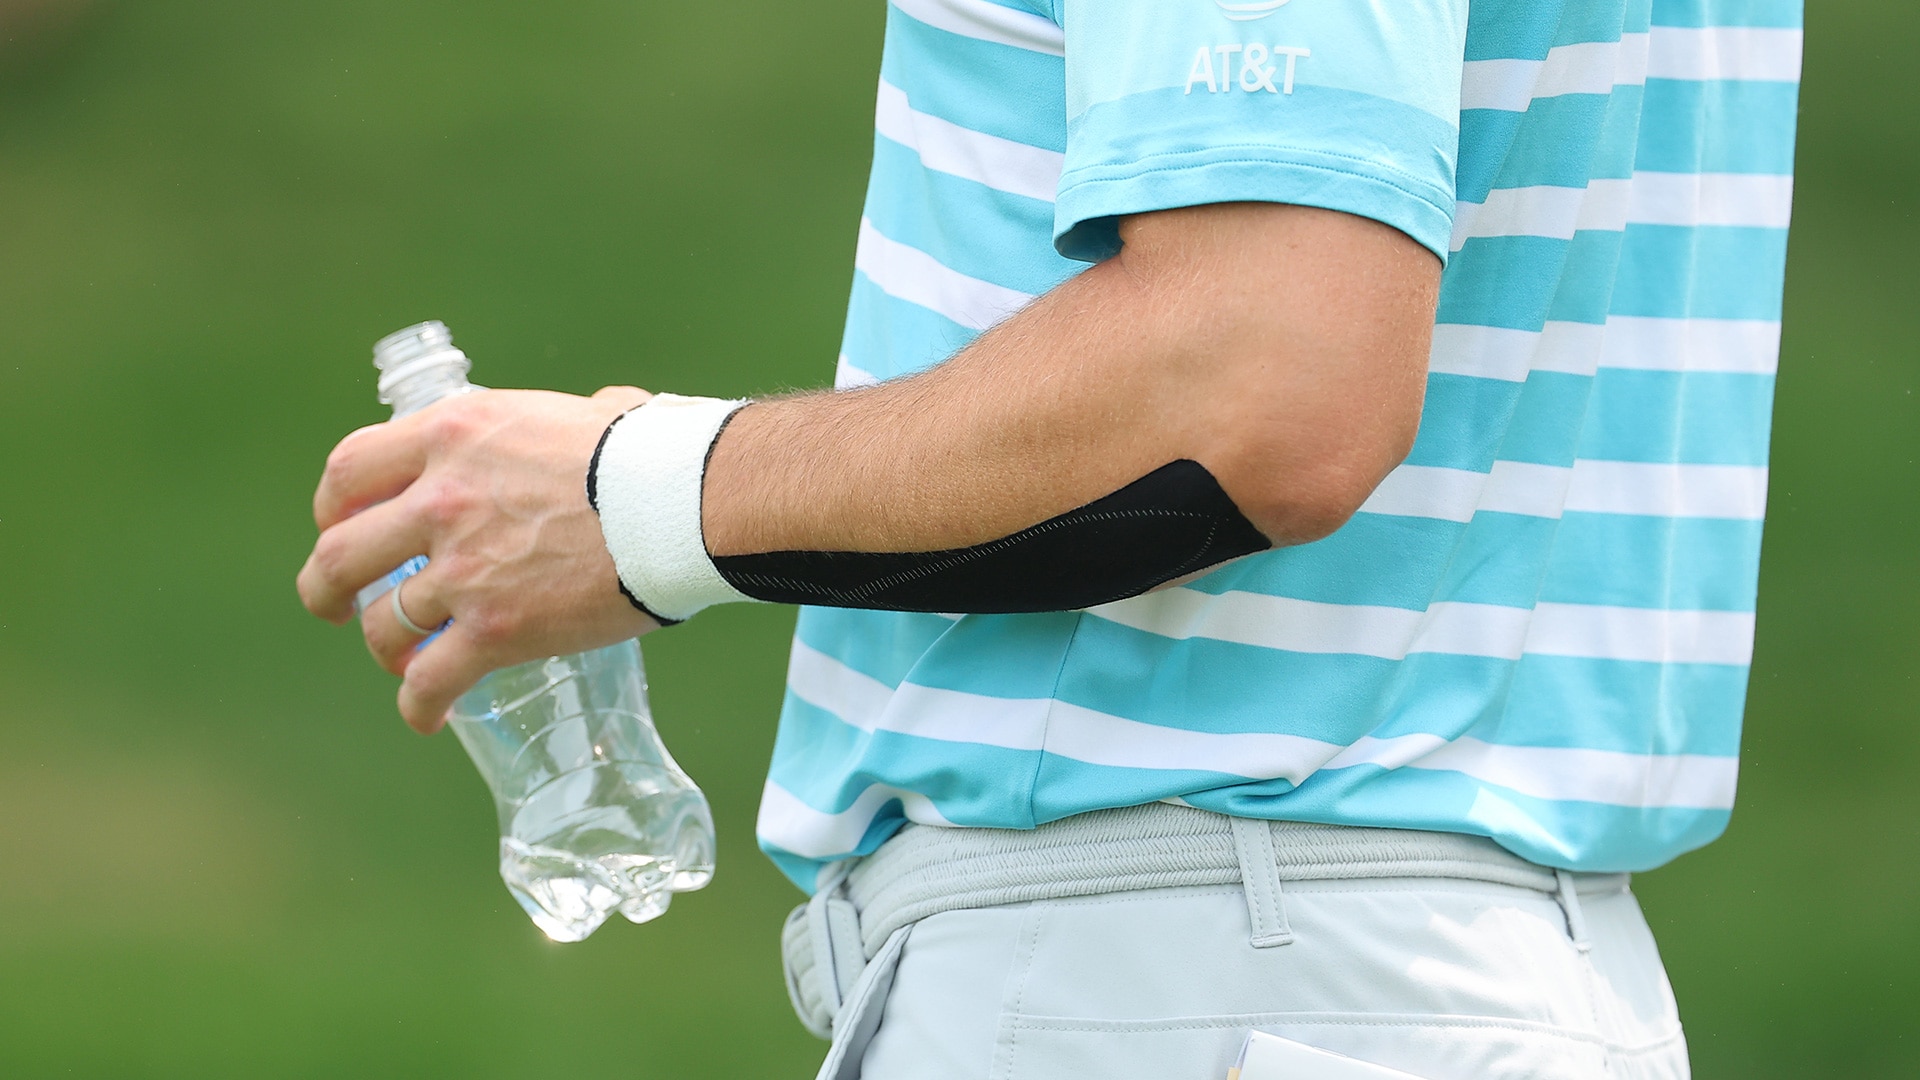 Jordan Spieth tests out injured wrist Tuesday at Oak Hill ahead of PGA Championship